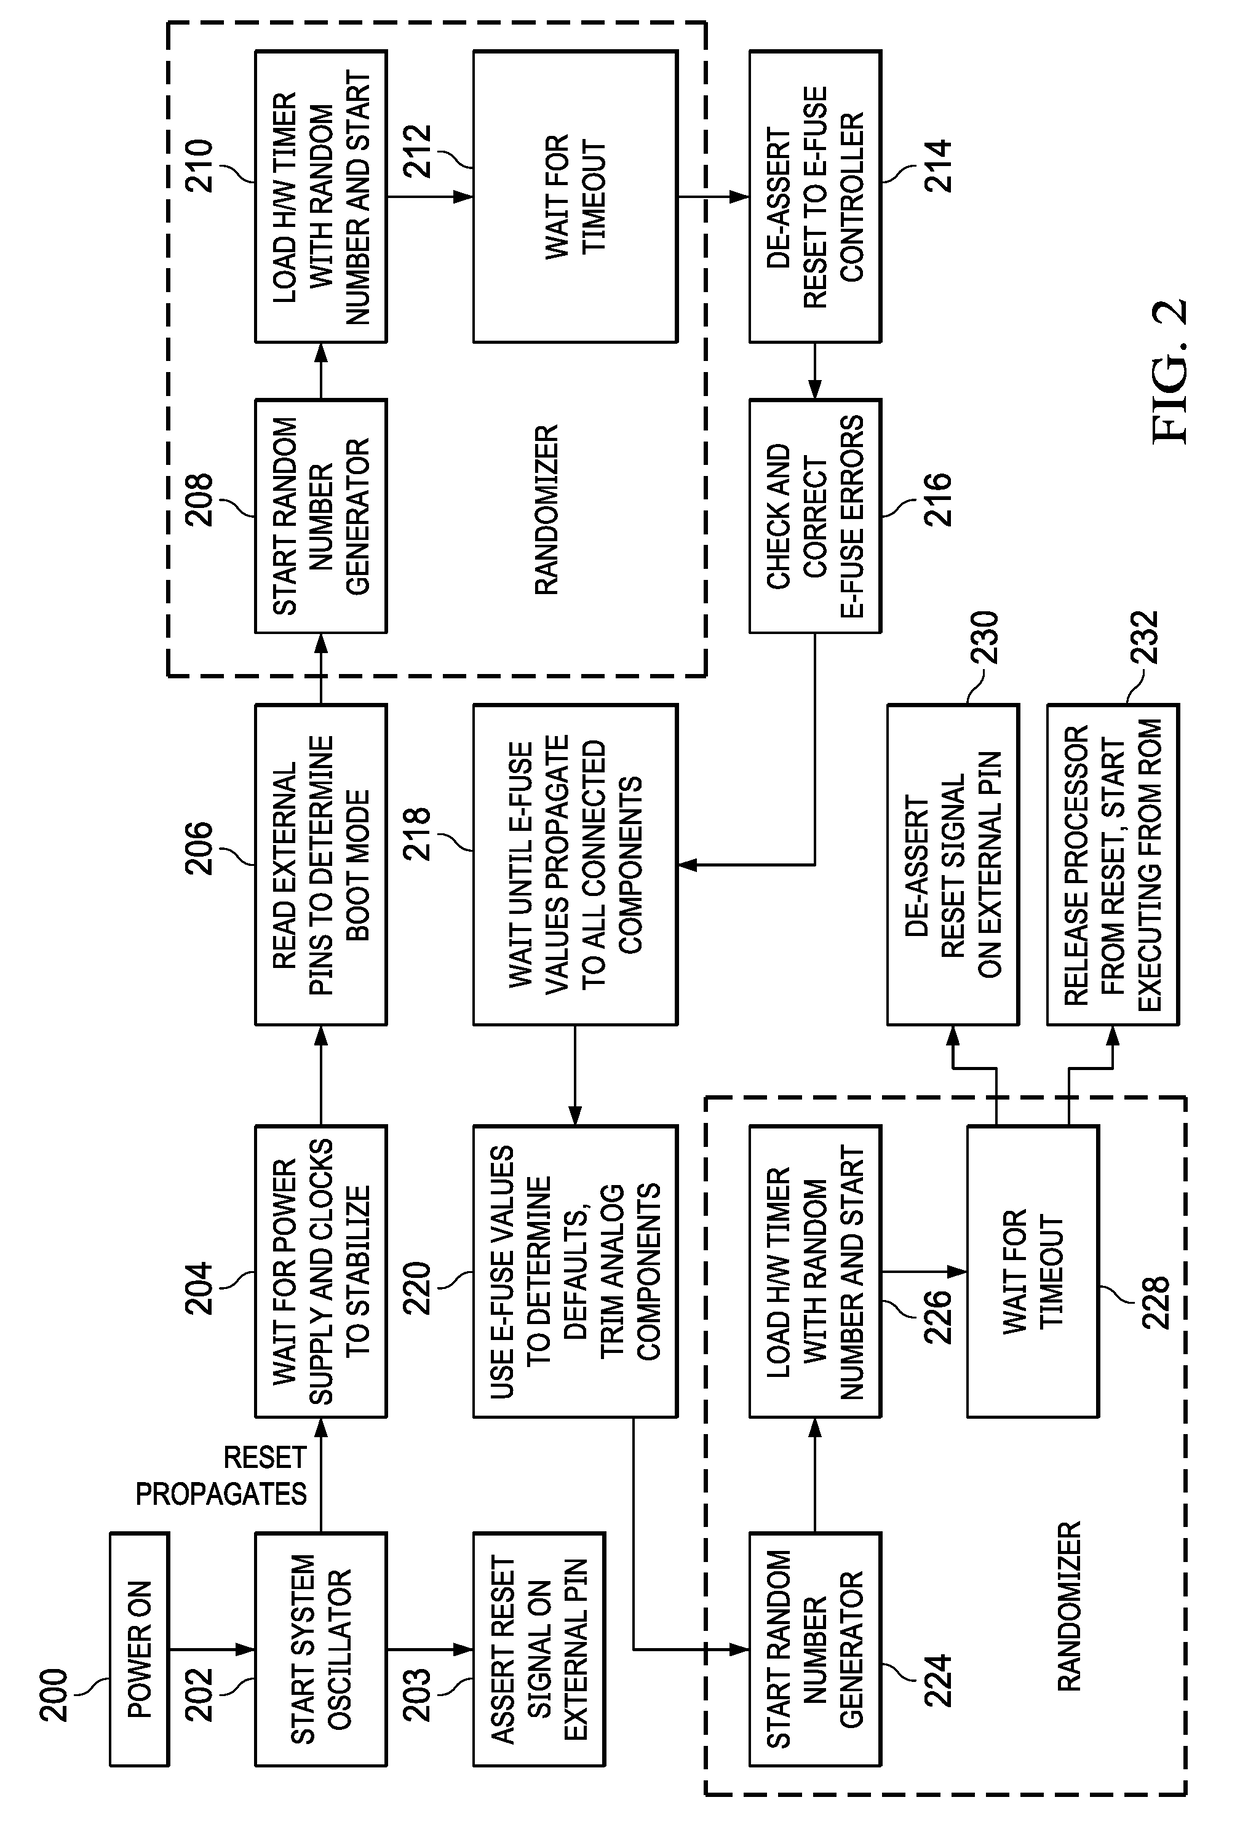 Randomized Execution Countermeasures Against Fault Injection Attacks During Boot of an Embedded Device